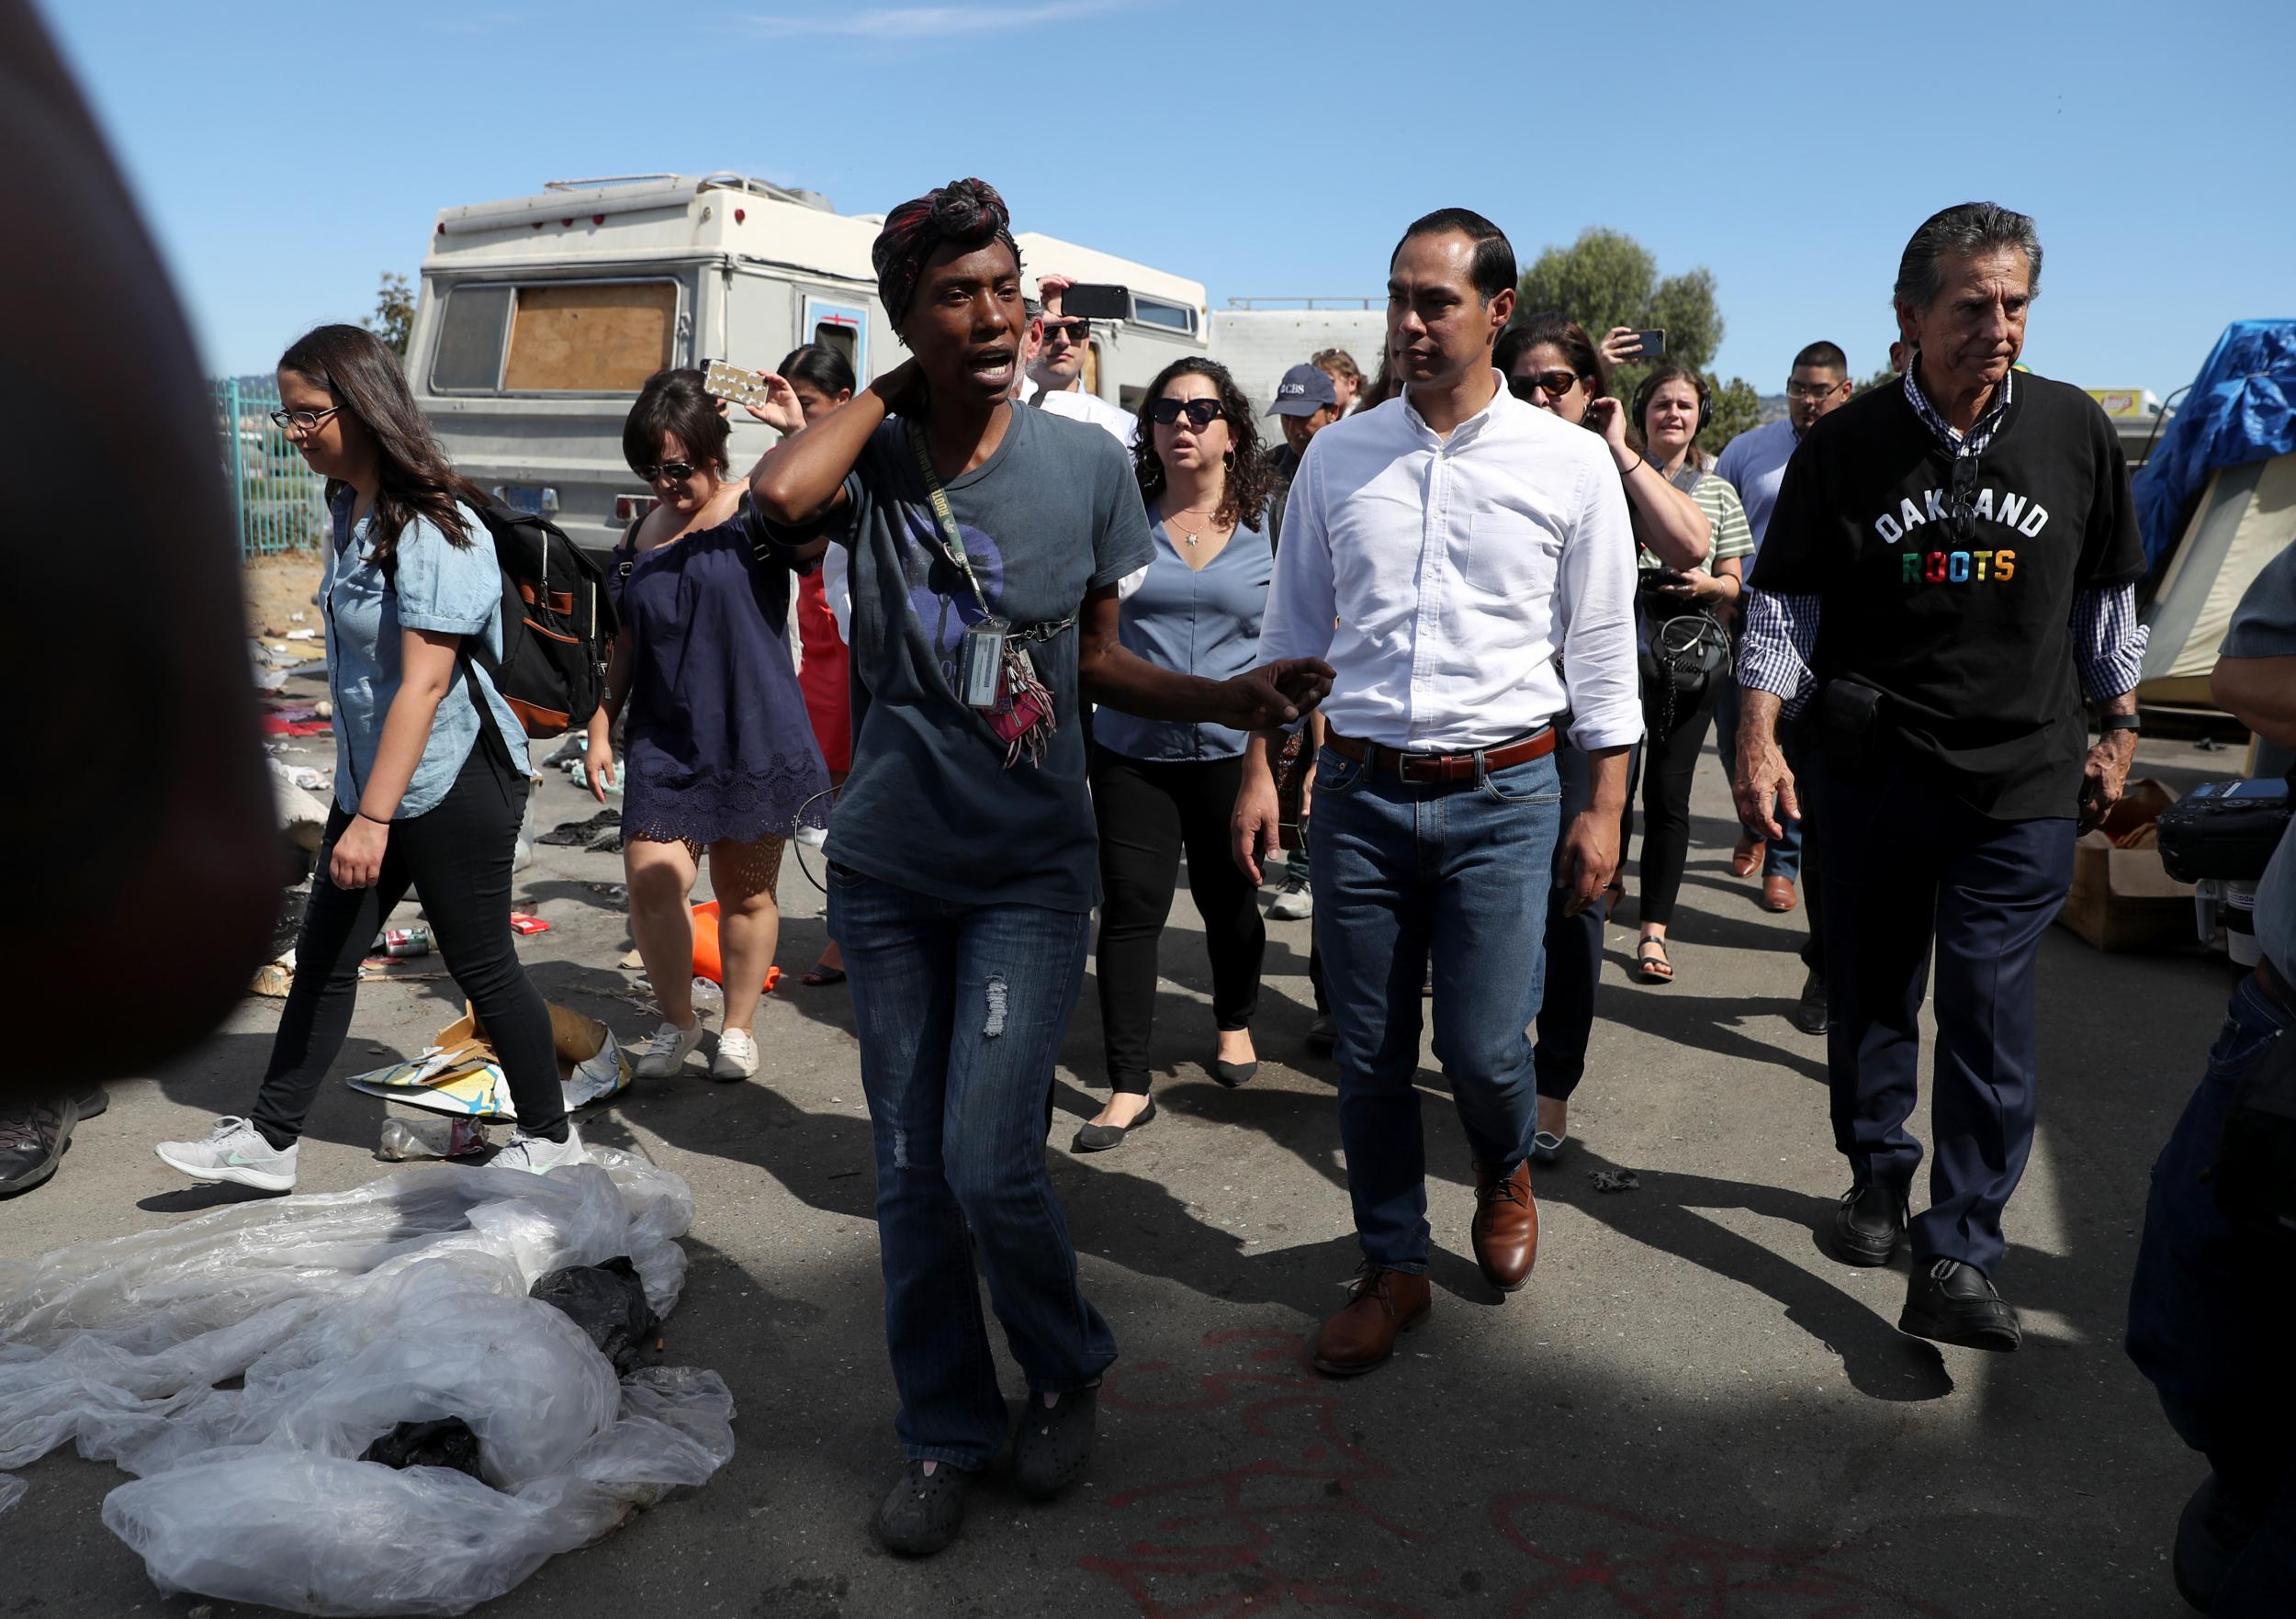 Former presidential candidate Julian Castro toured an Oakland homeless encampment that officials plan to remove.